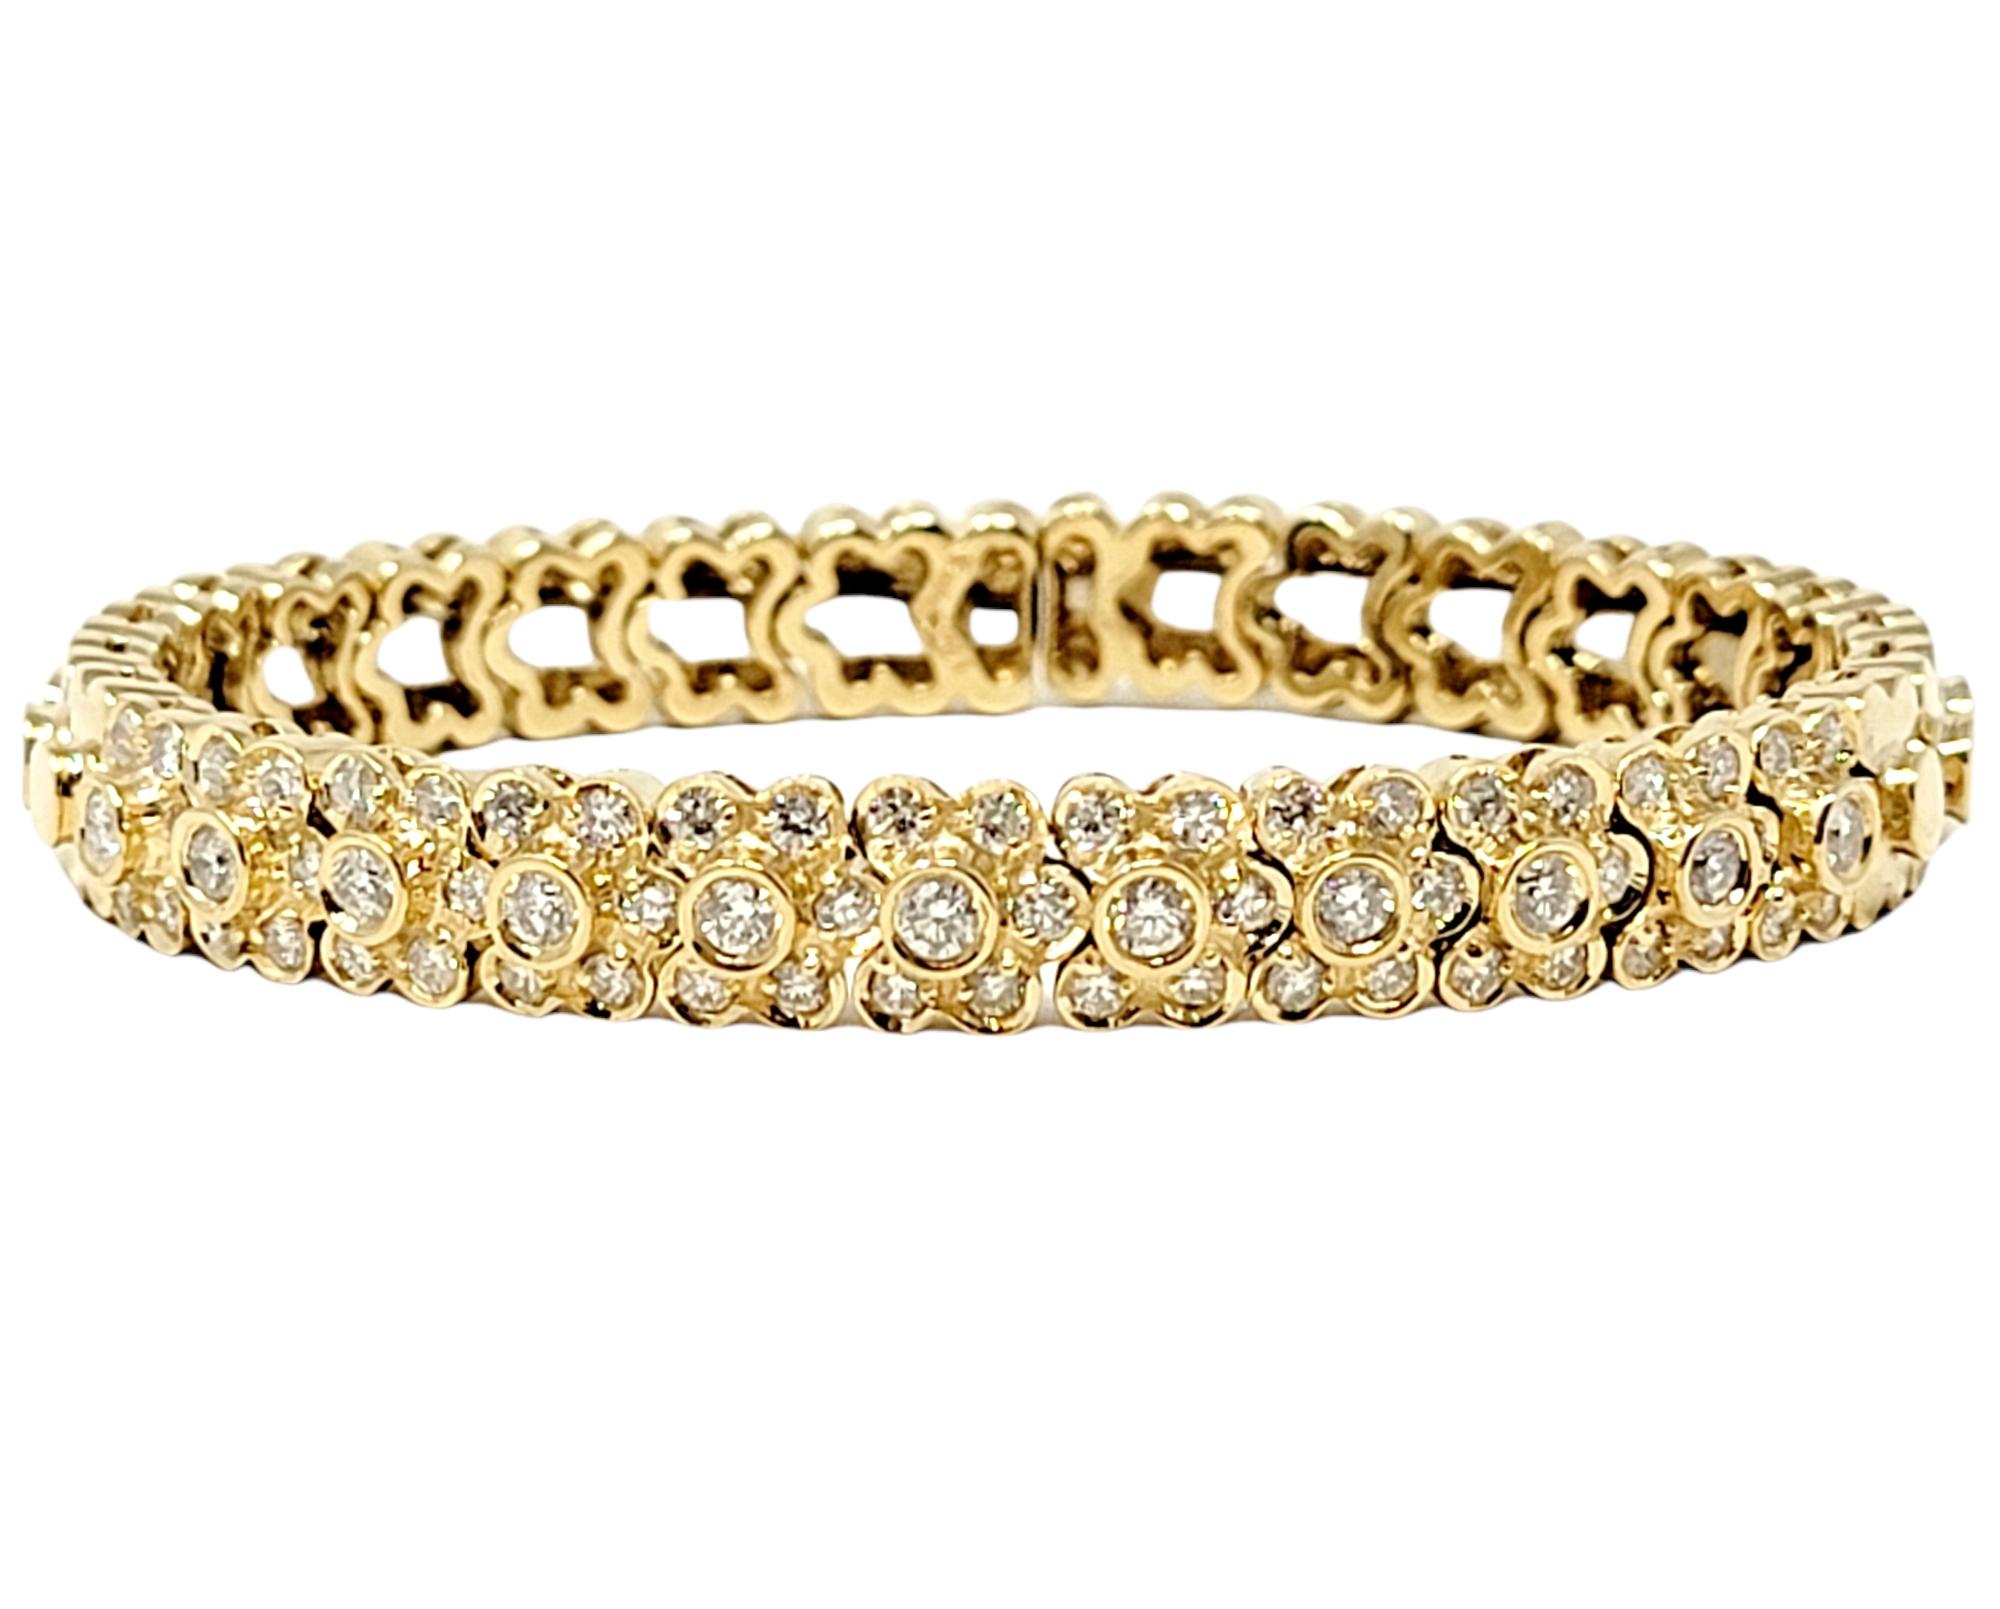 Beautiful diamond cuff bracelet by jewelry designer, Sonia B. Dressed up or down, this lovely and versatile piece is the perfect addition to your jewelry wardrobe. It features a single row of bezel and bead set natural diamonds in a gorgeous